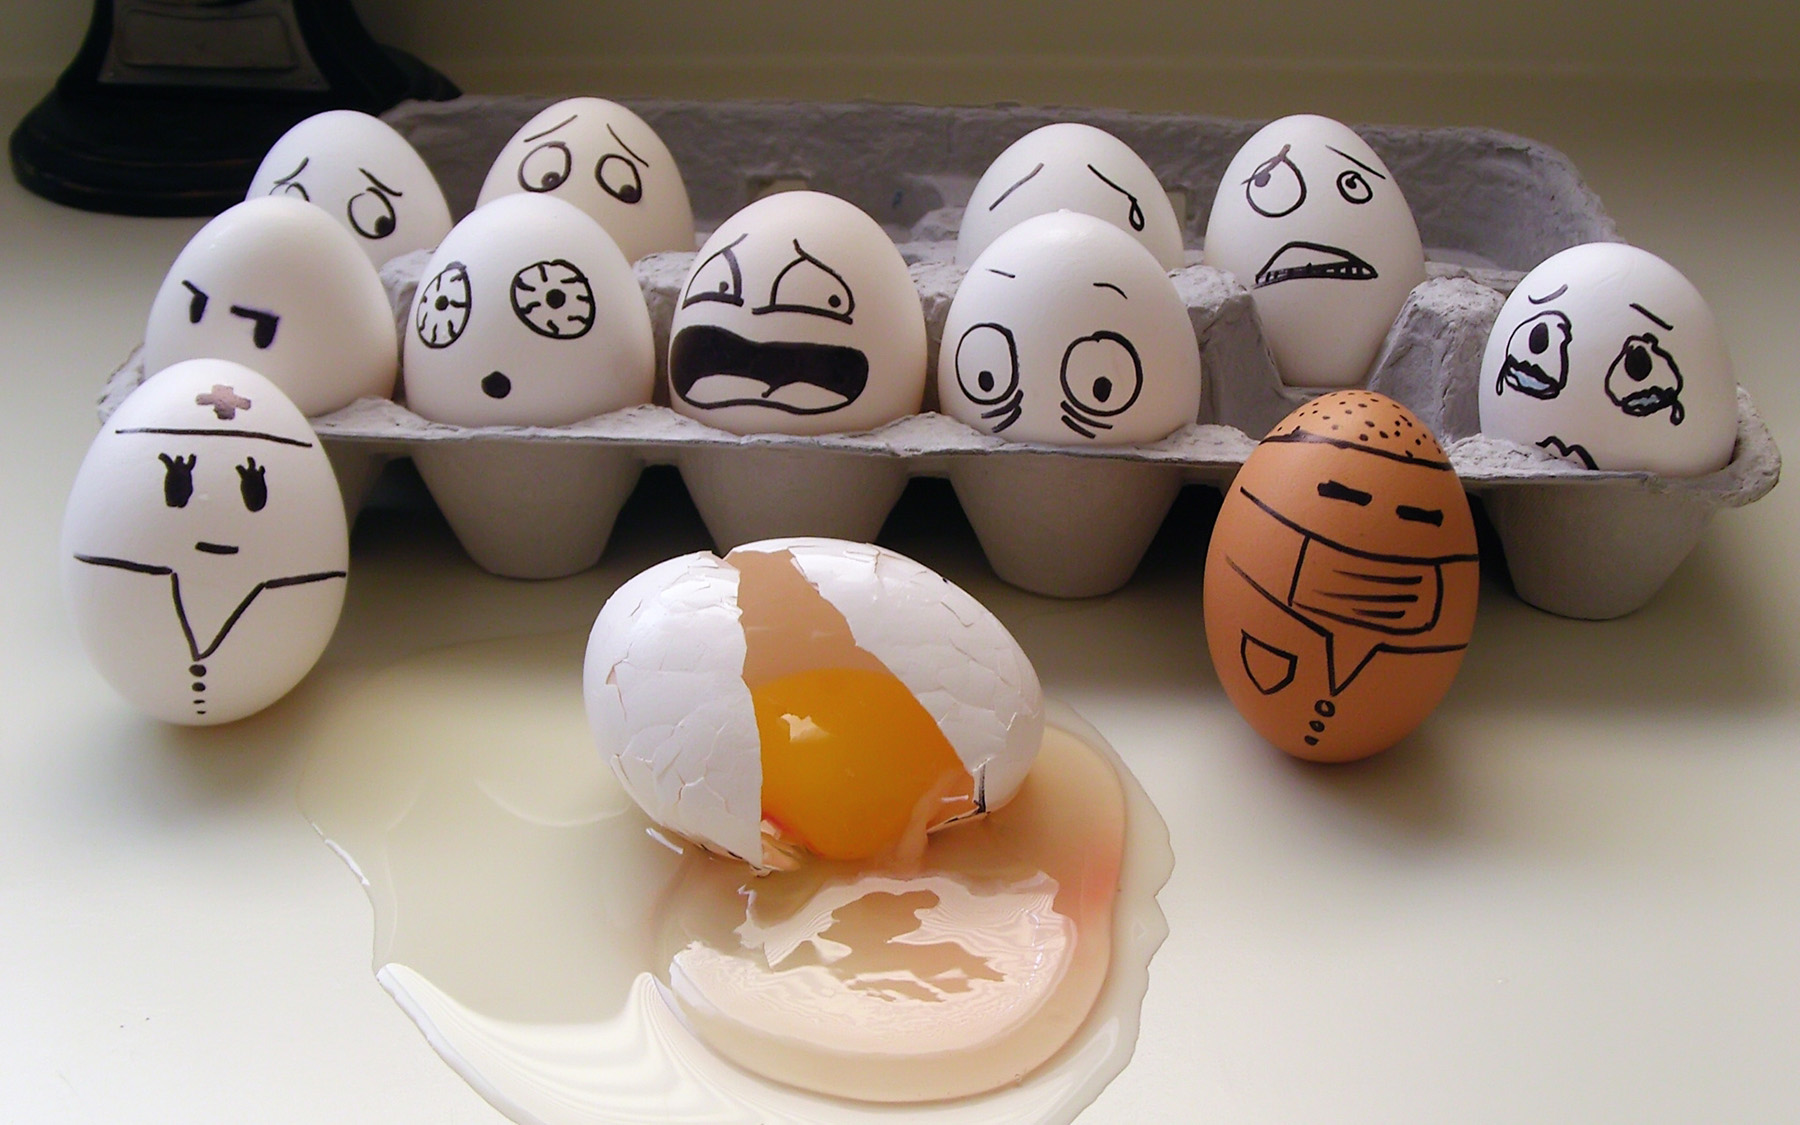 eggs-with-personality-31276